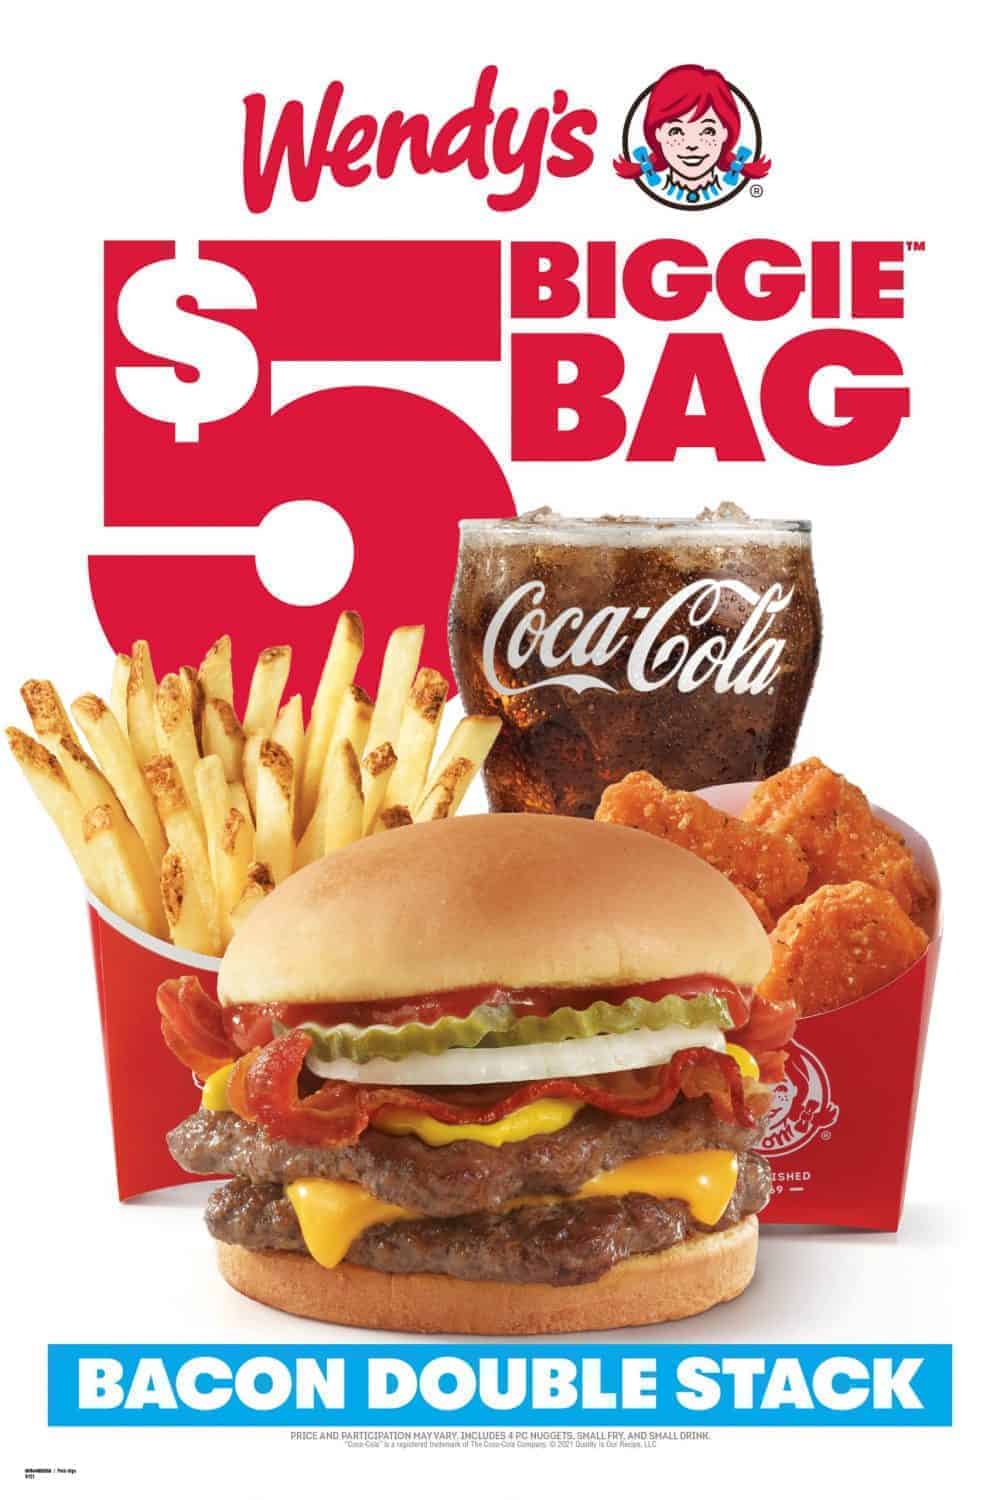 Wendy's offers 5 Biggie Bag with 4 items Living On The Cheap